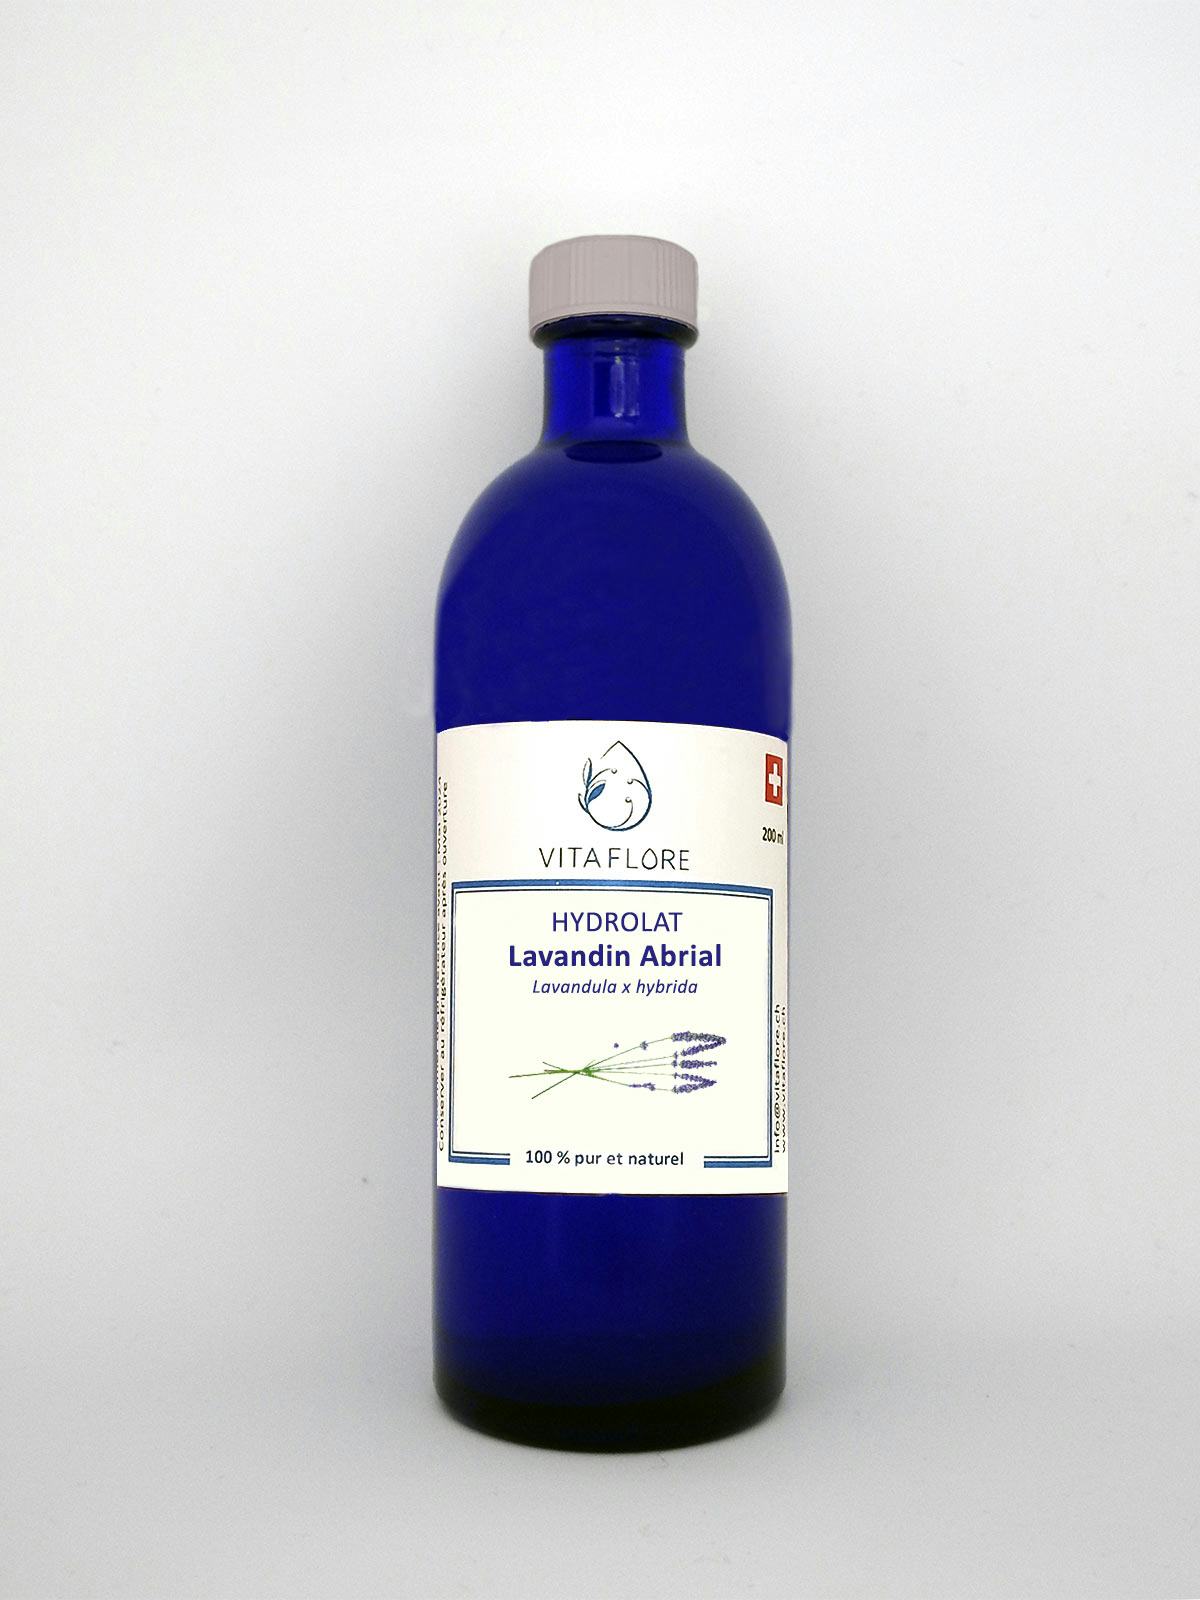 Hydrosol Lavandin Abrial, artisanal product for direct sale in Switzerland